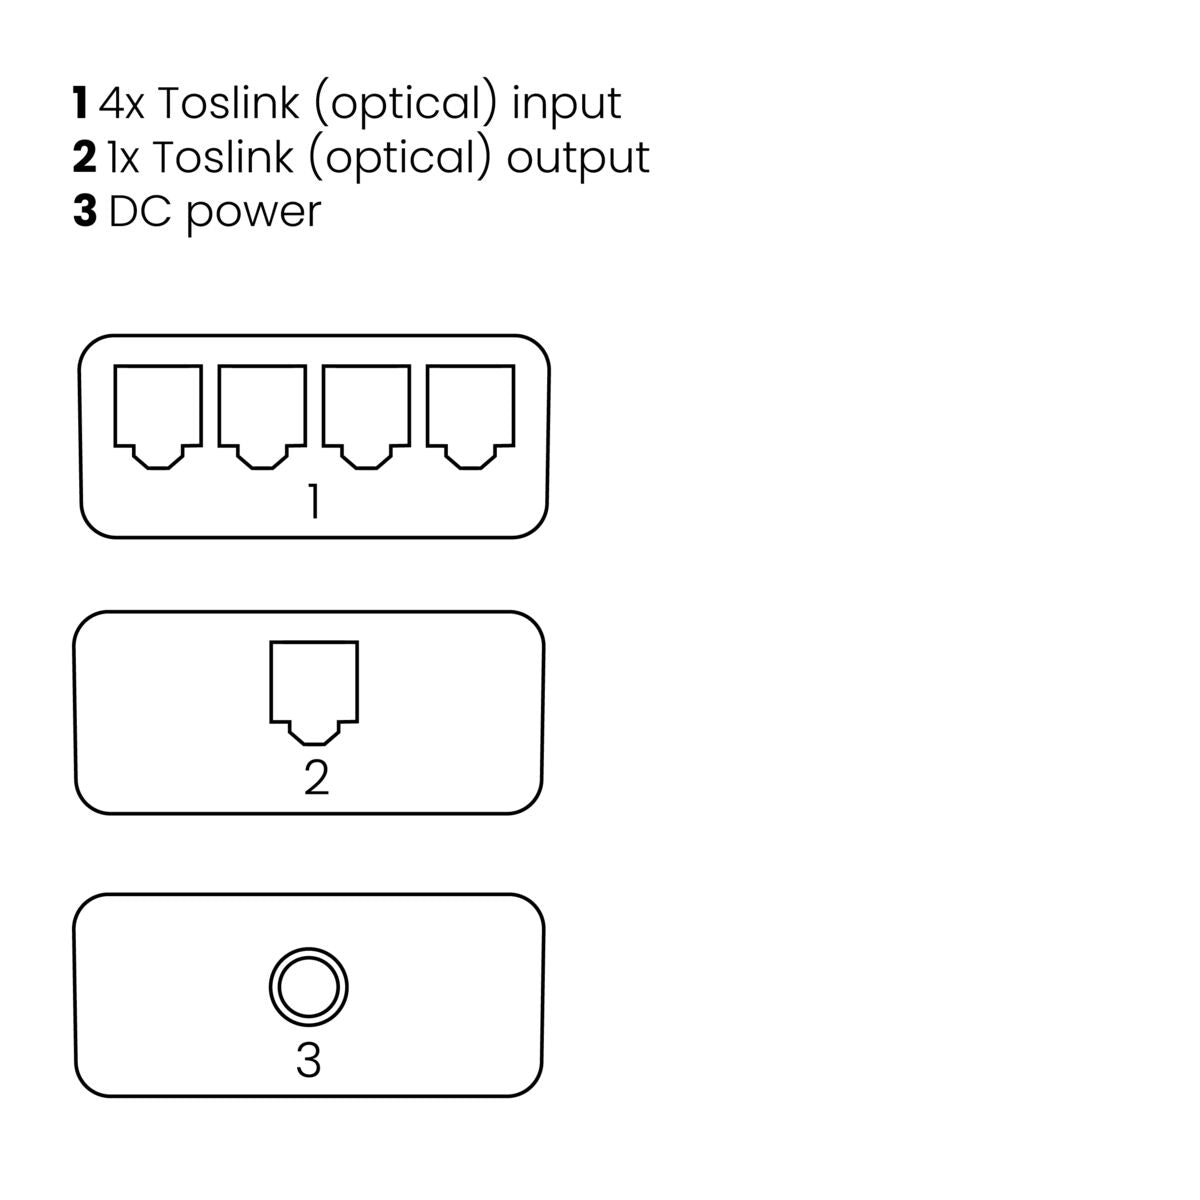 Connect TS41 - Optical switch - 4 in / 1 out - Toslink